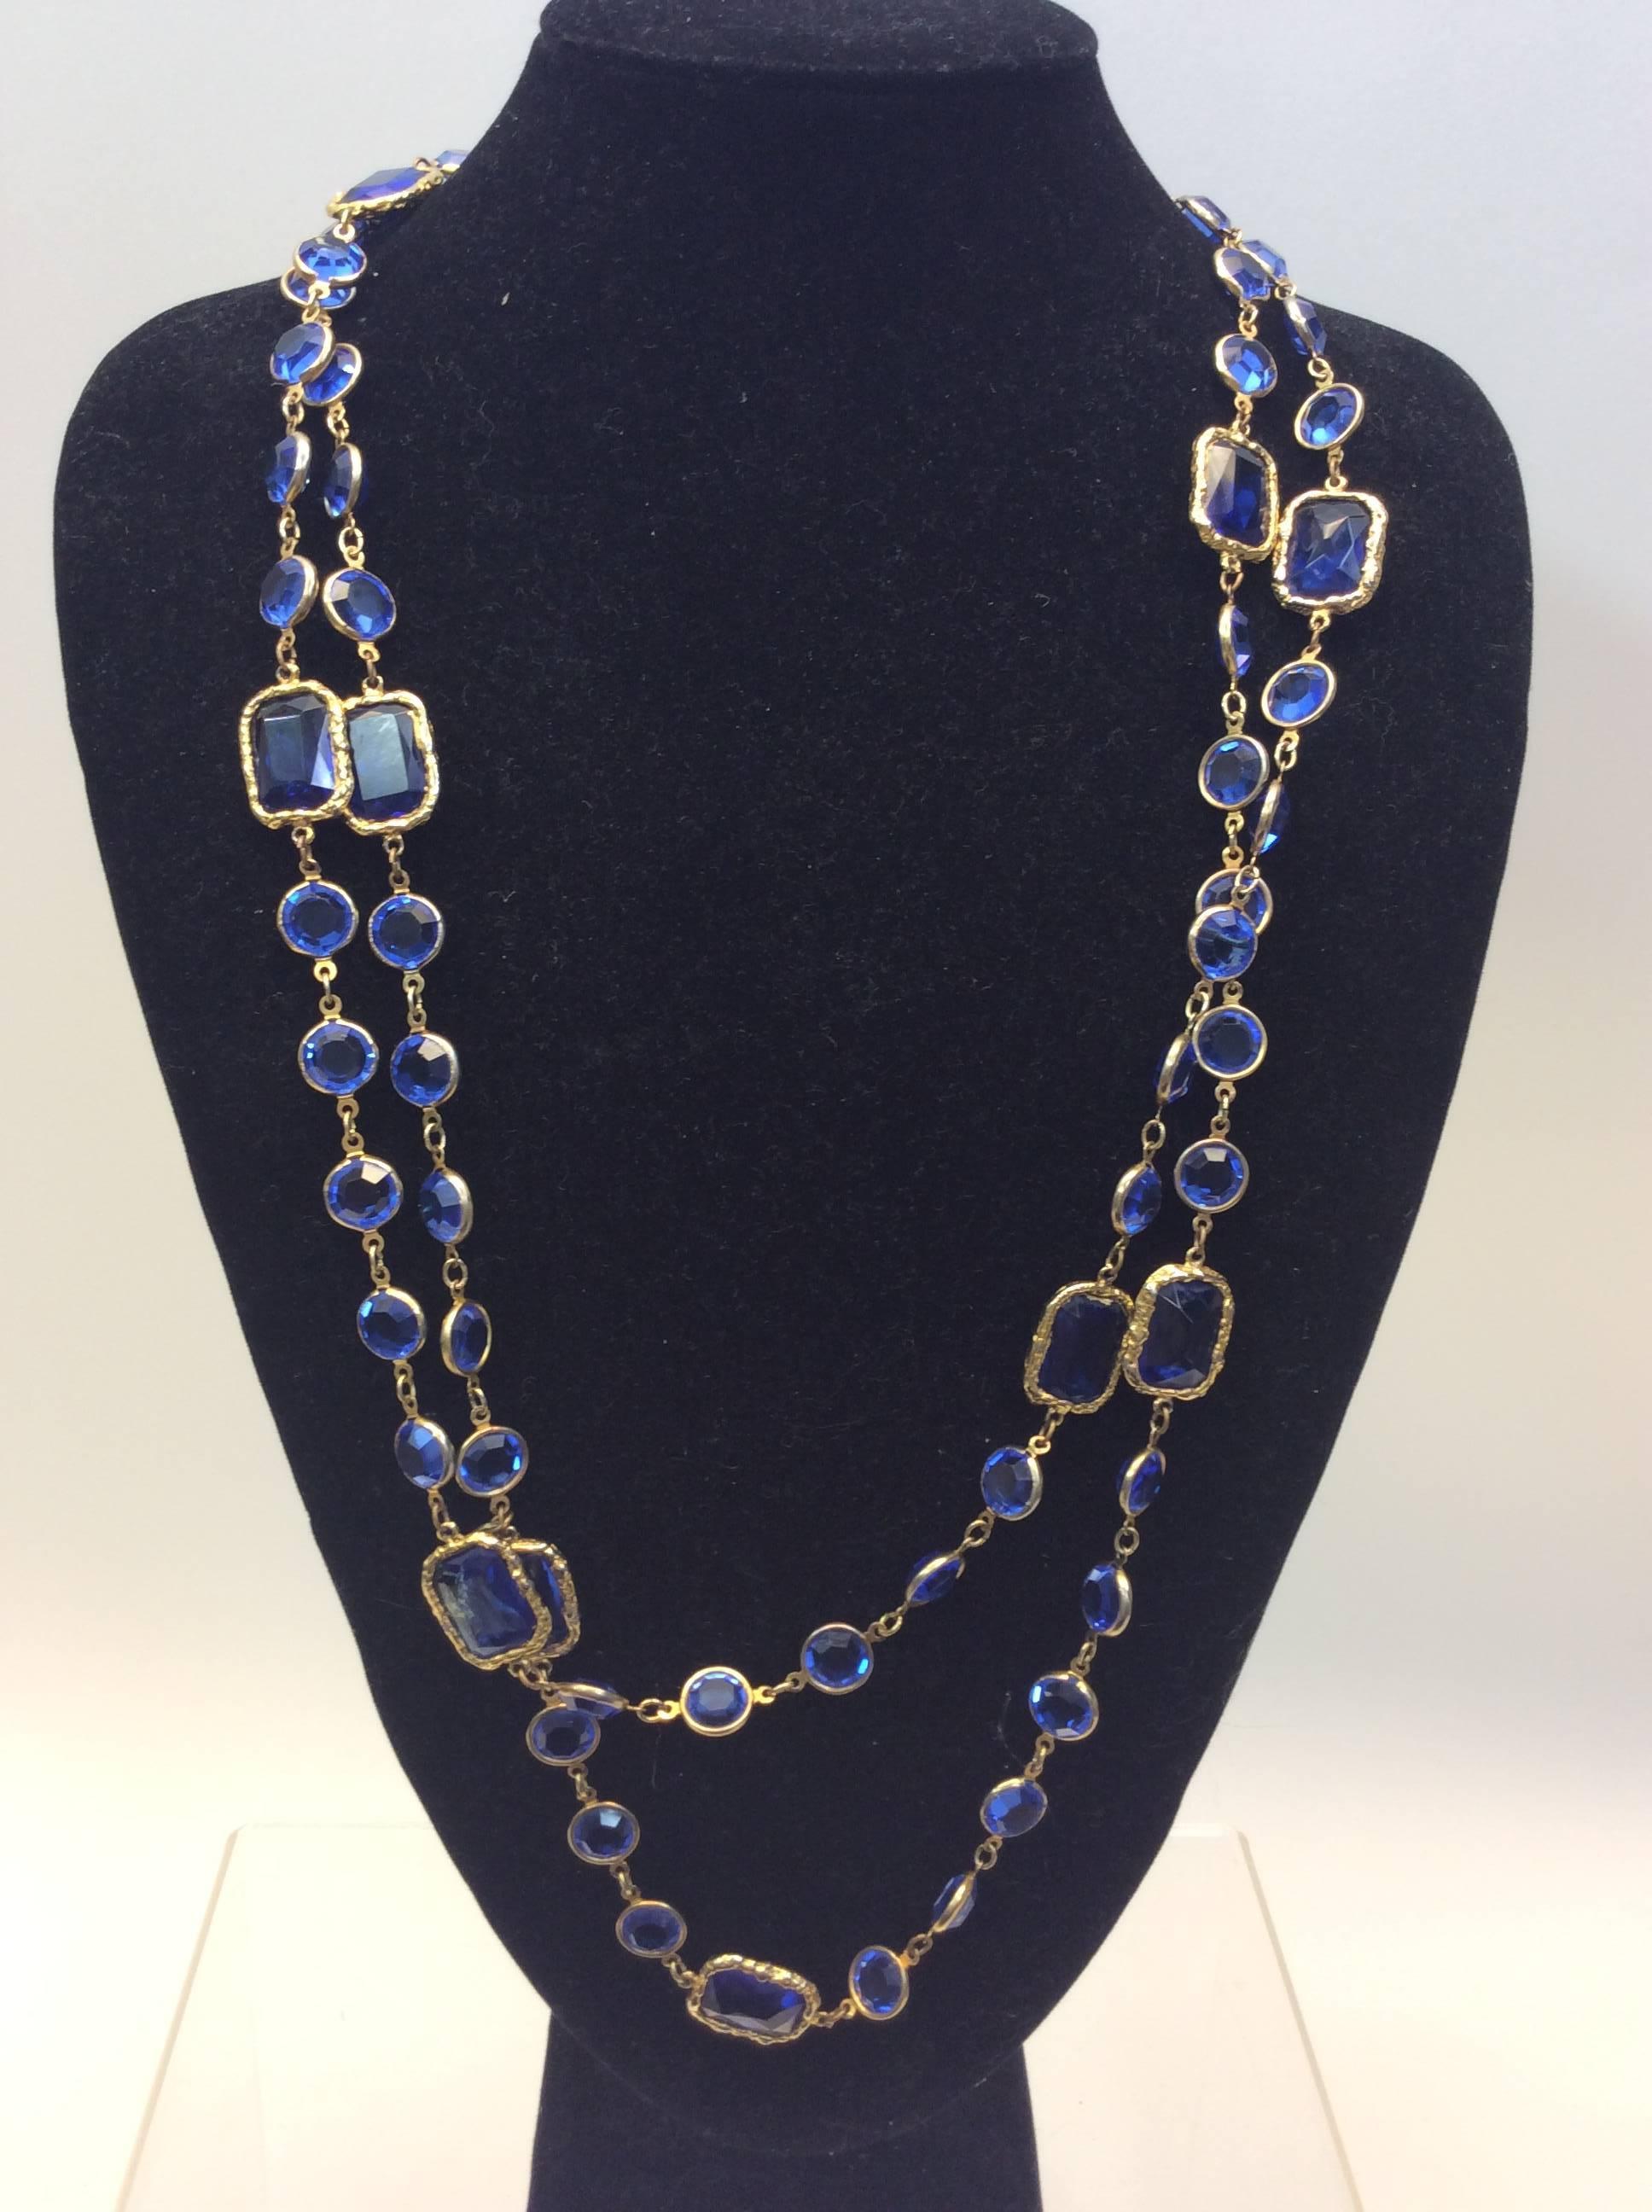 Chanel Gold and Blue Chicklet Necklace
Made in 1981
$3600
Gold
32.5